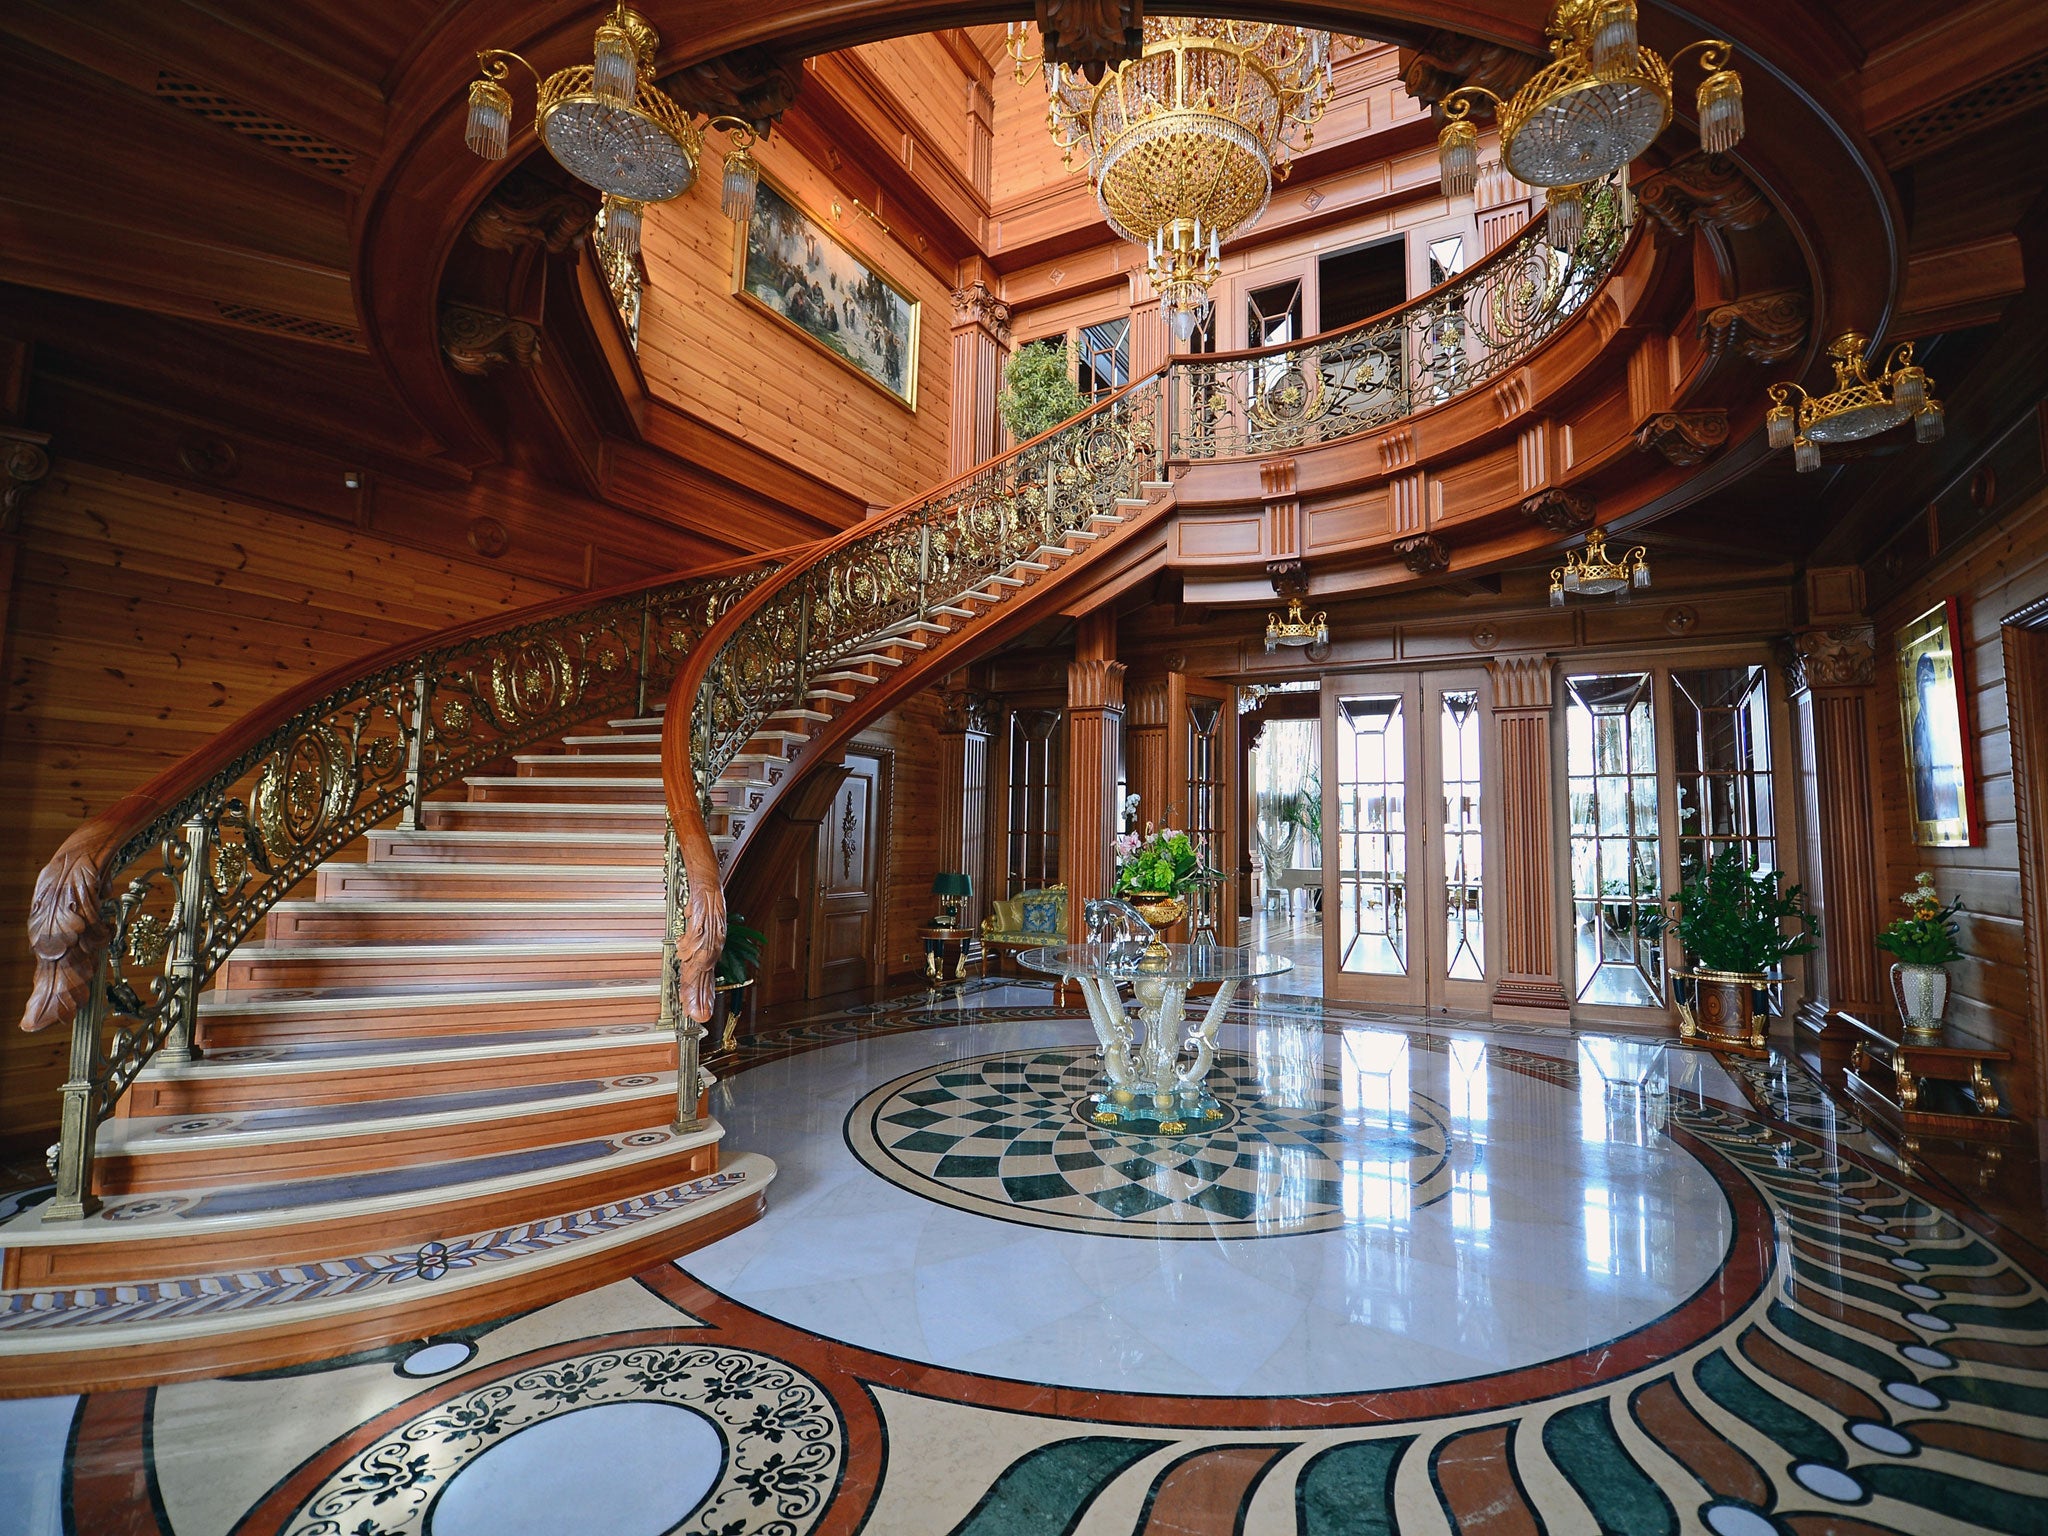 A staircase winds up in a view of a room inside President Viktor Yanukovych's Mezhyhirya estate, which he abandoned as further evidence of his corrupt behaviour continues to surface from the incriminating documents found at his mansion